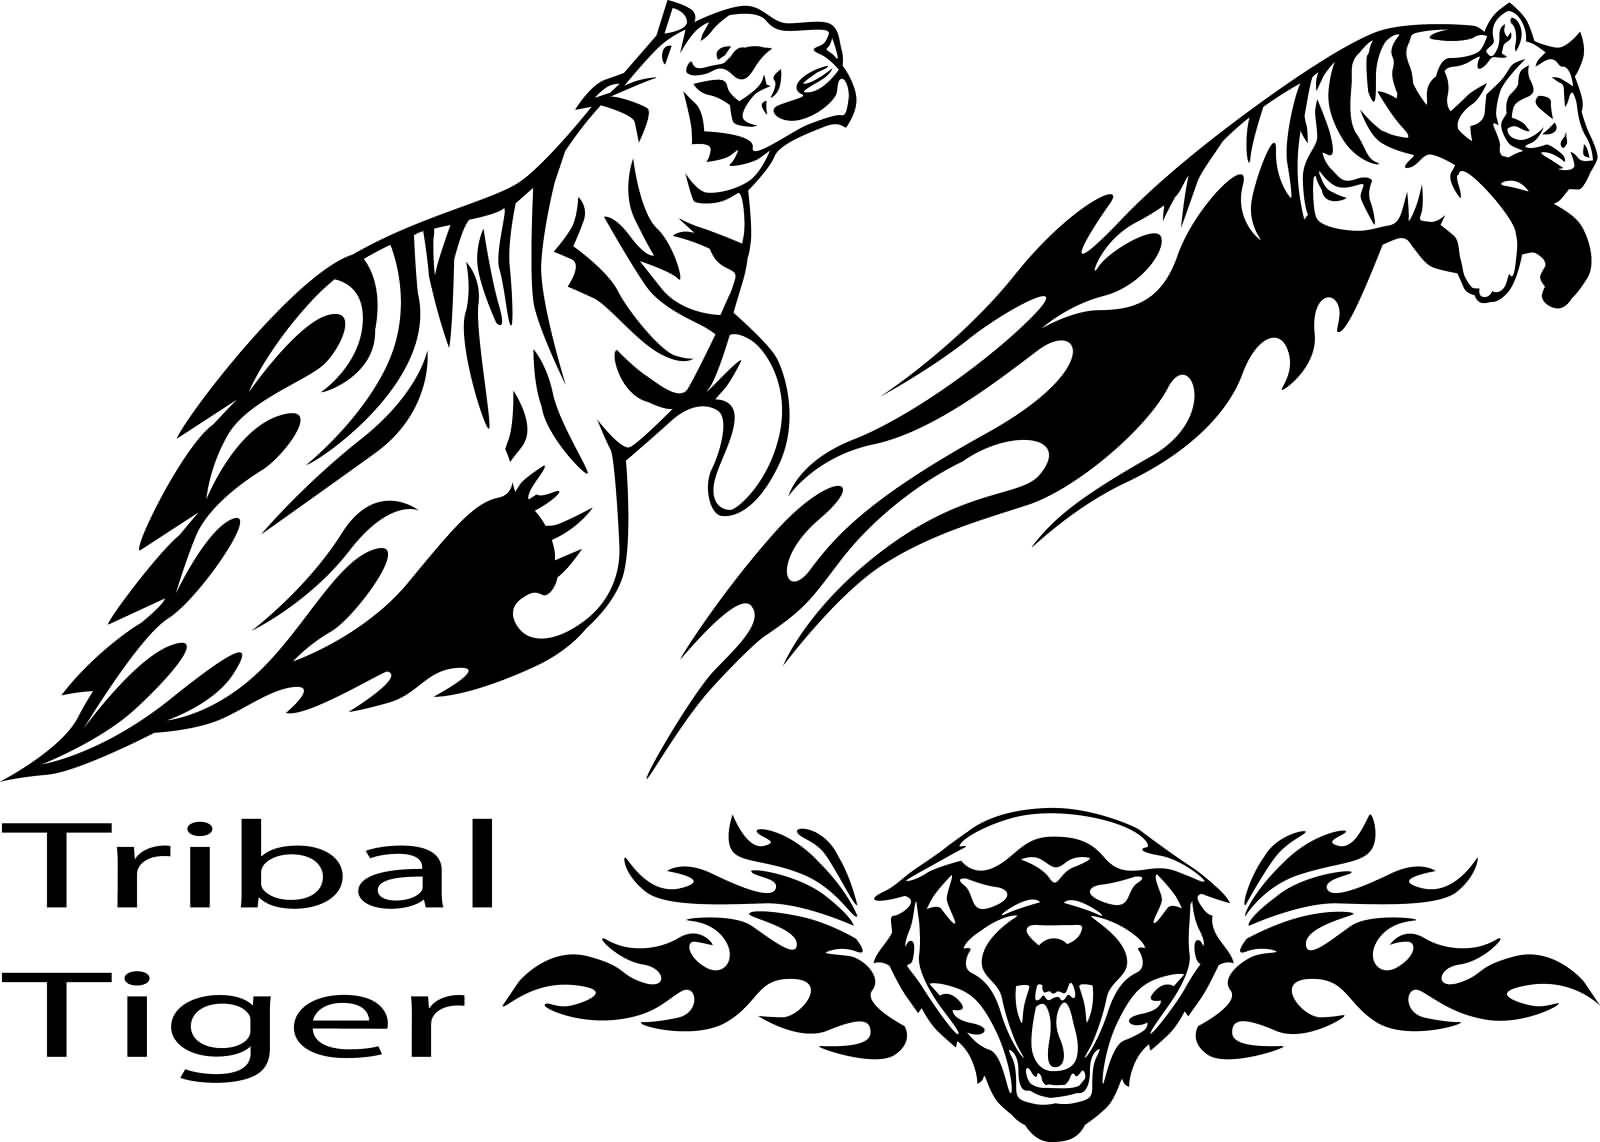 Tribal Tigers Jumping And Roaring Tattoo Samples